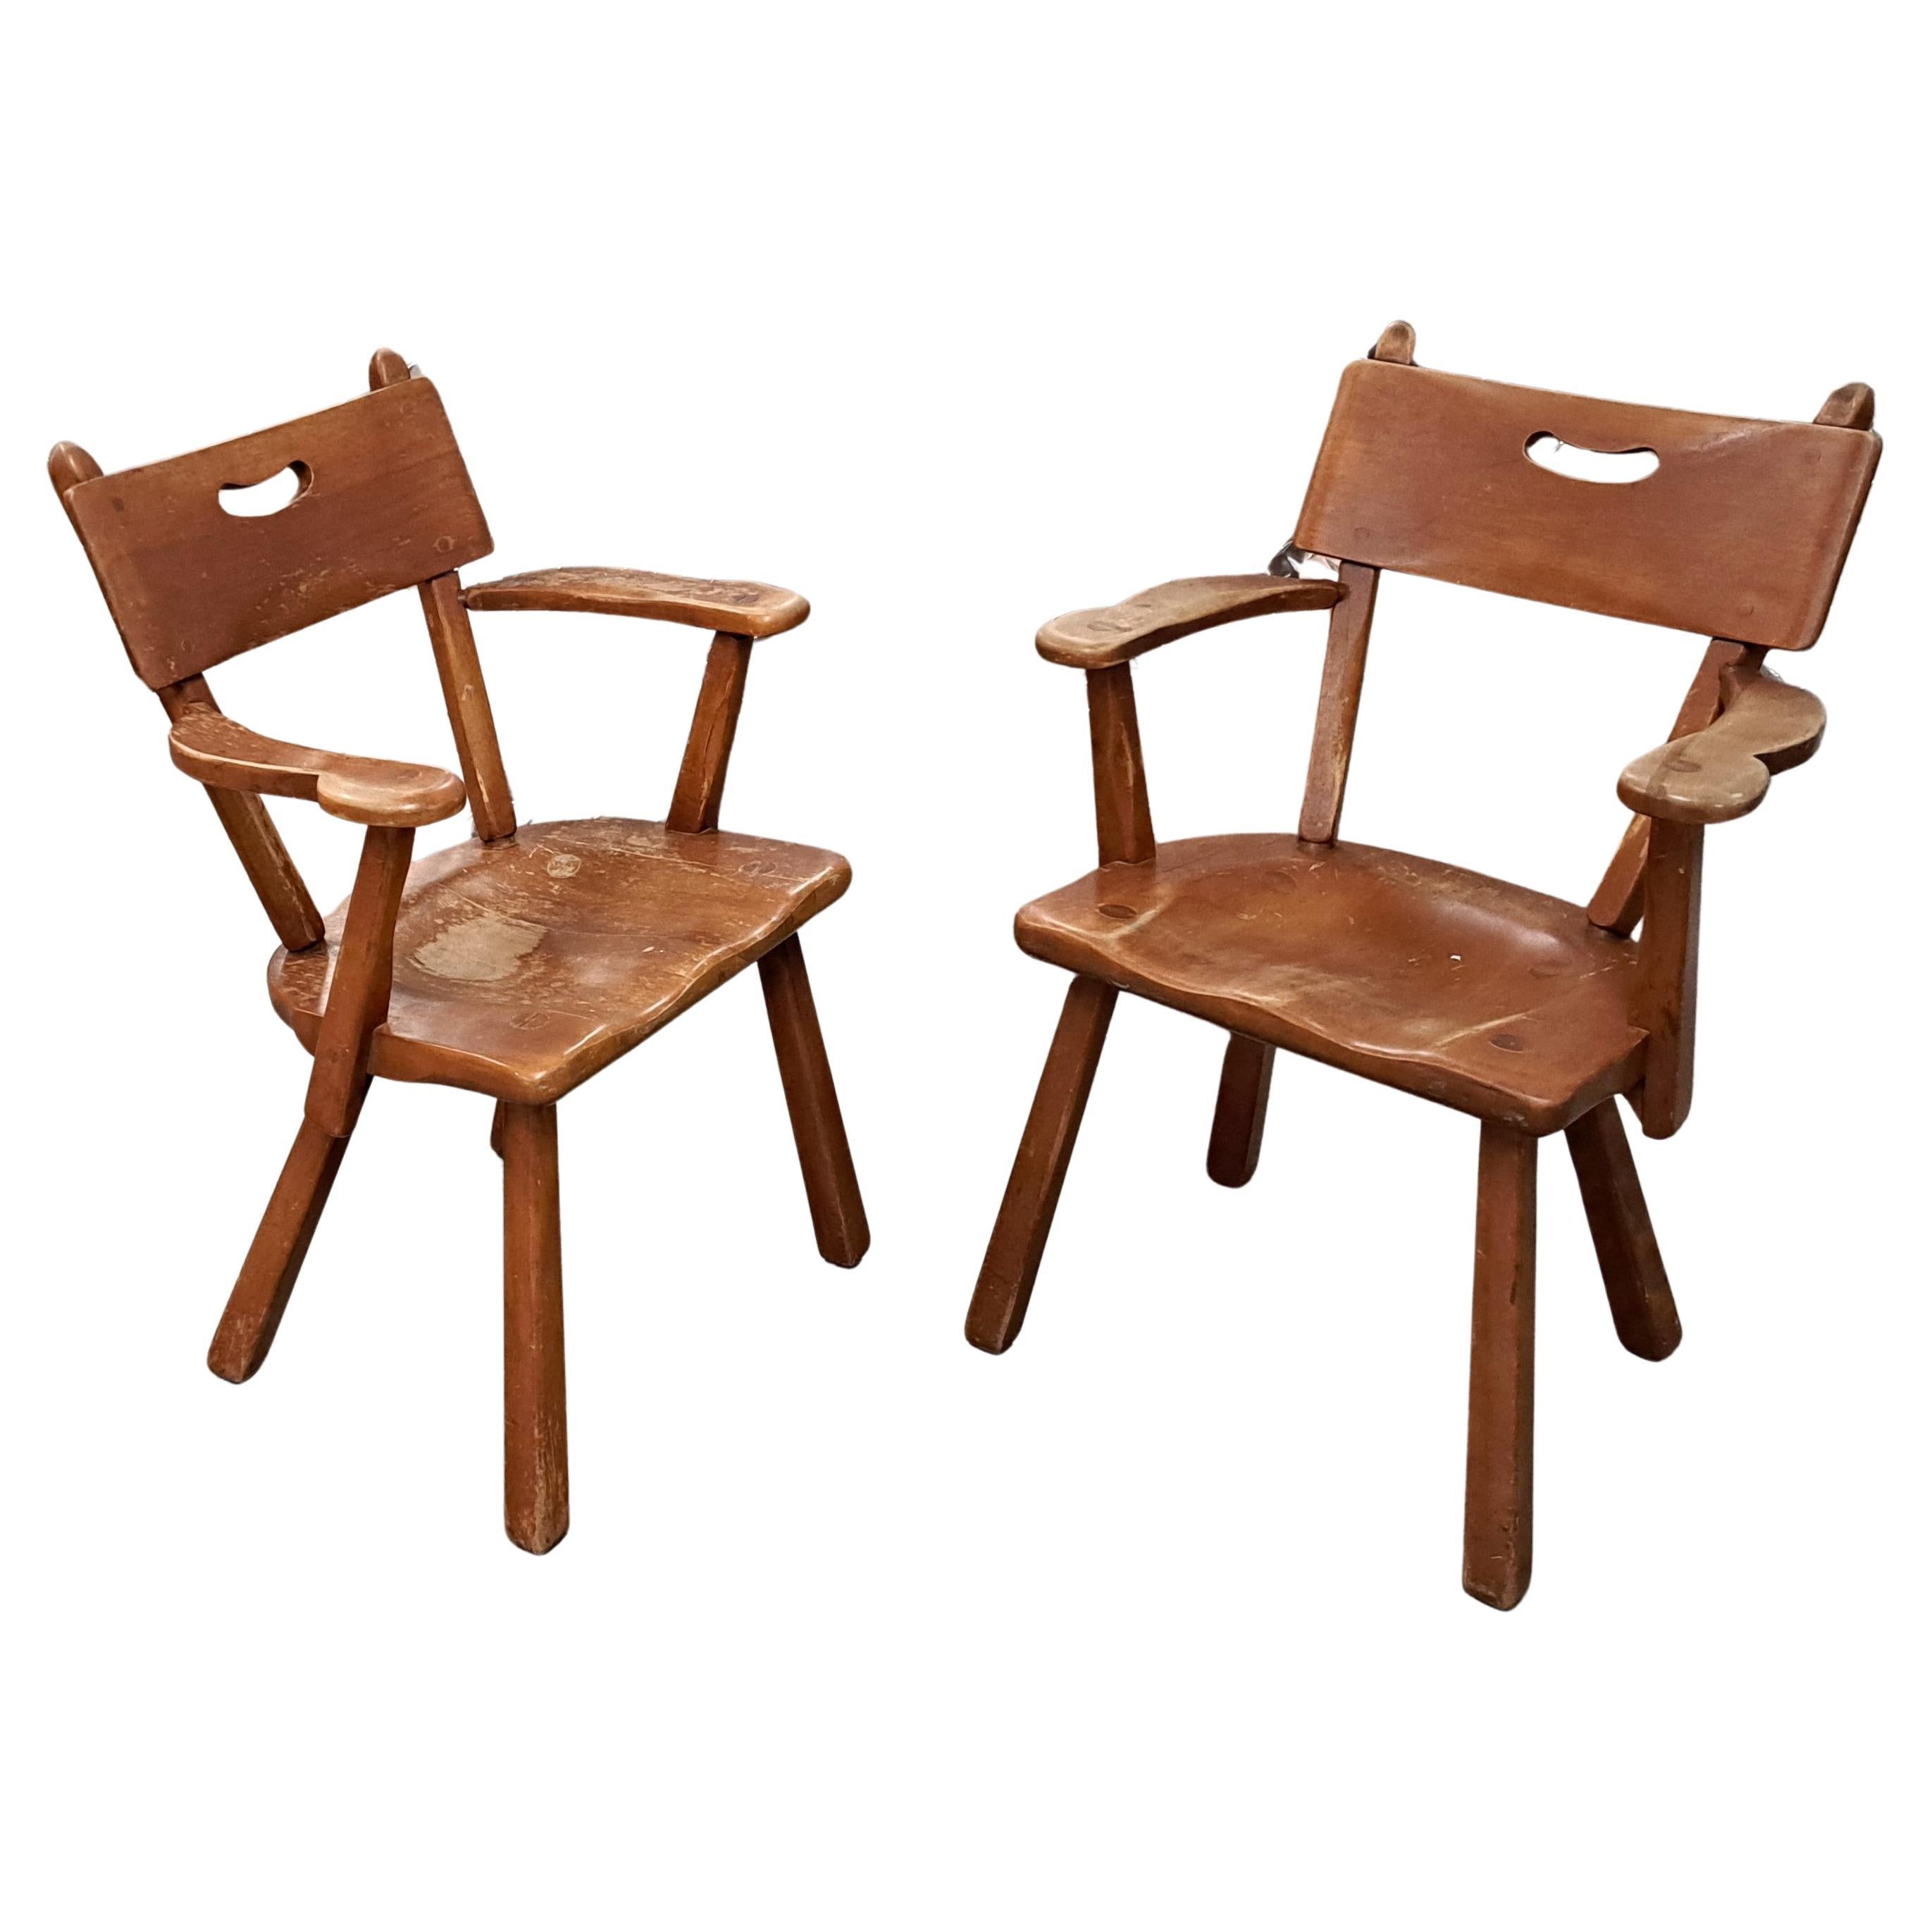 H.T. Cushman Manufacturing Company Dining Room Chairs